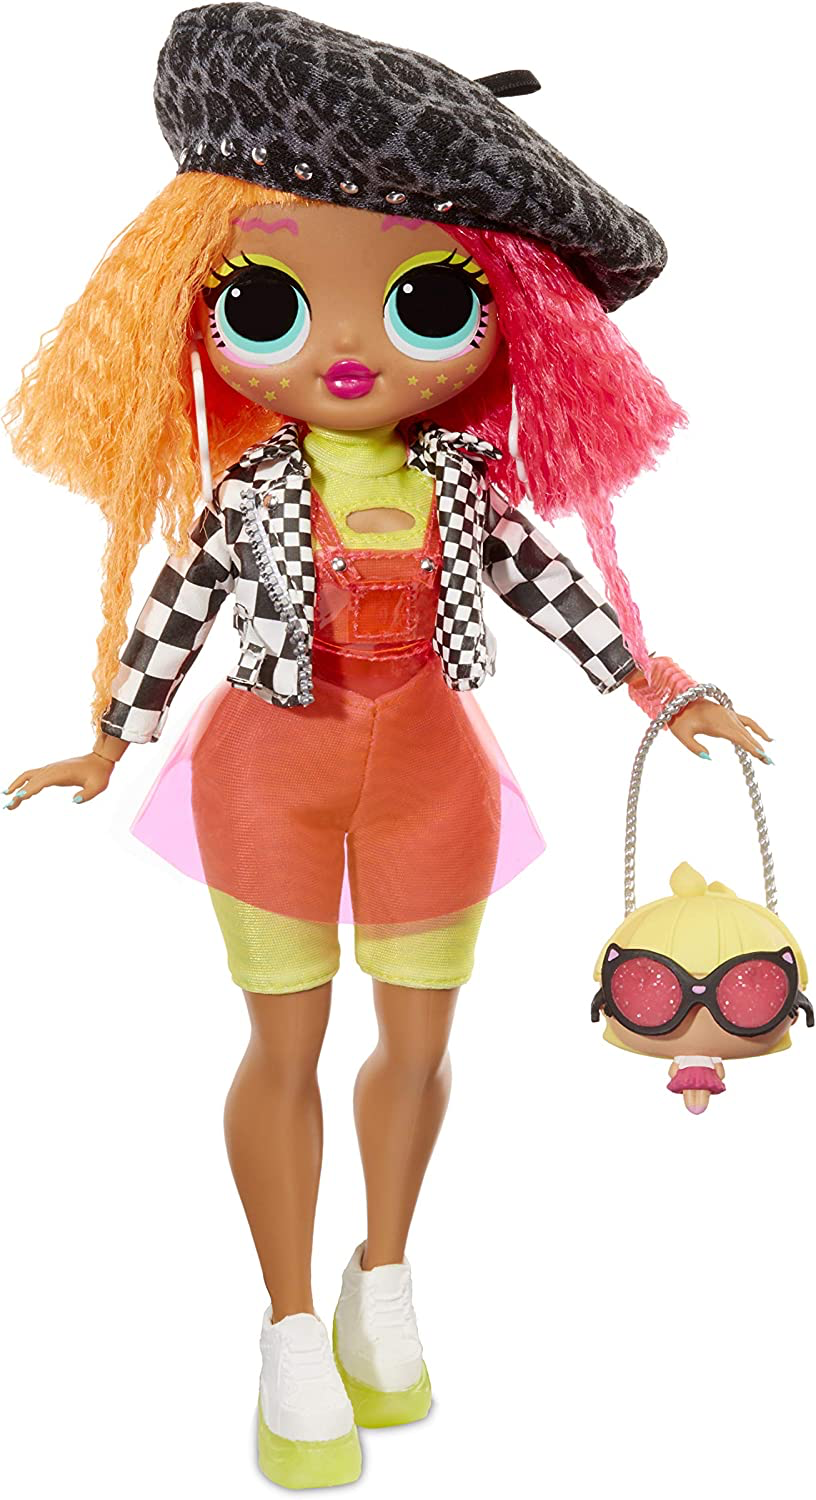 L.O.L. Surprise OMG Neonlicious Doll with accessories // Free Delivery  - $88.00